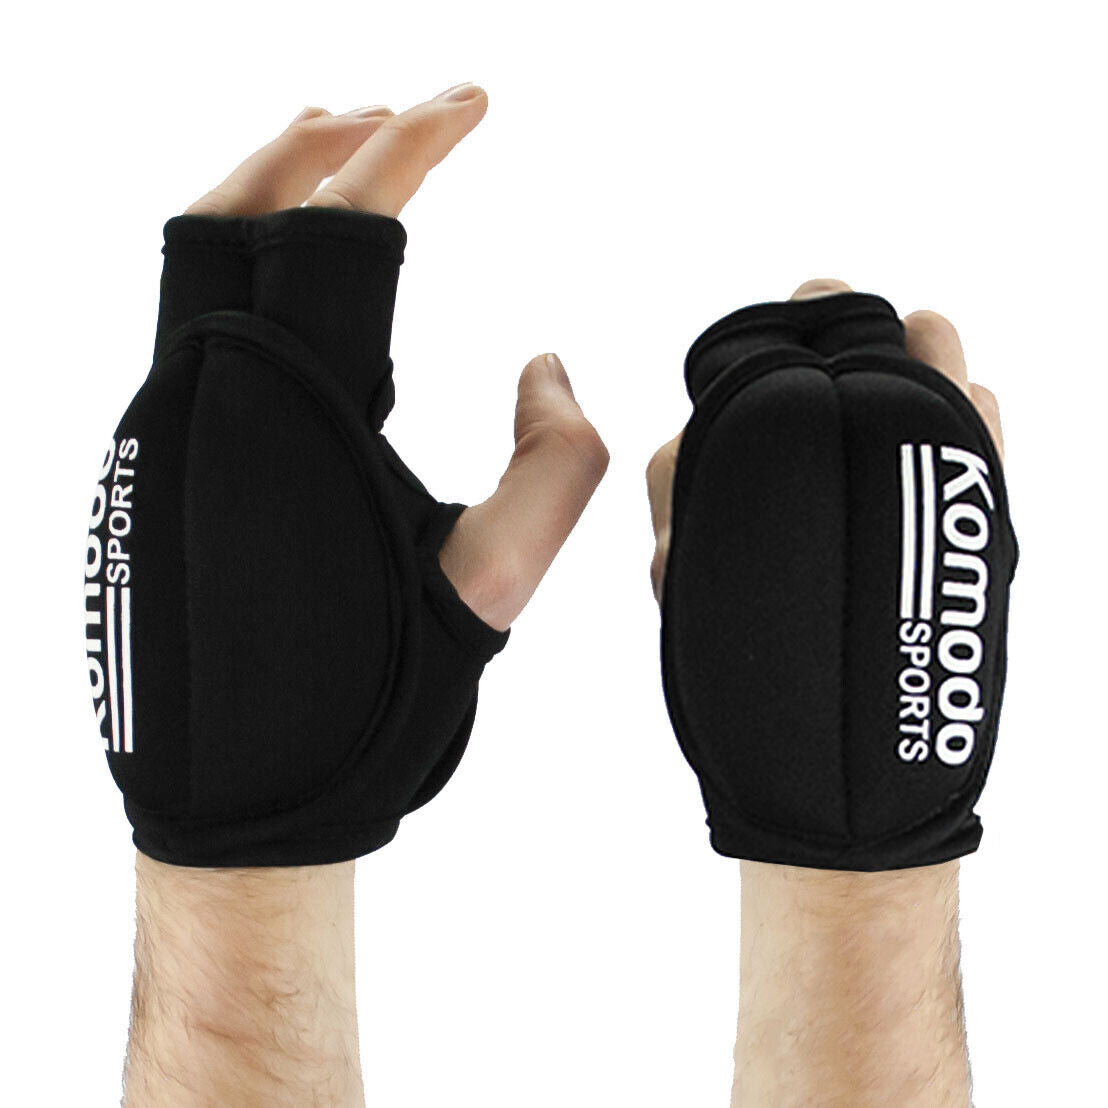 weighted gloves uk